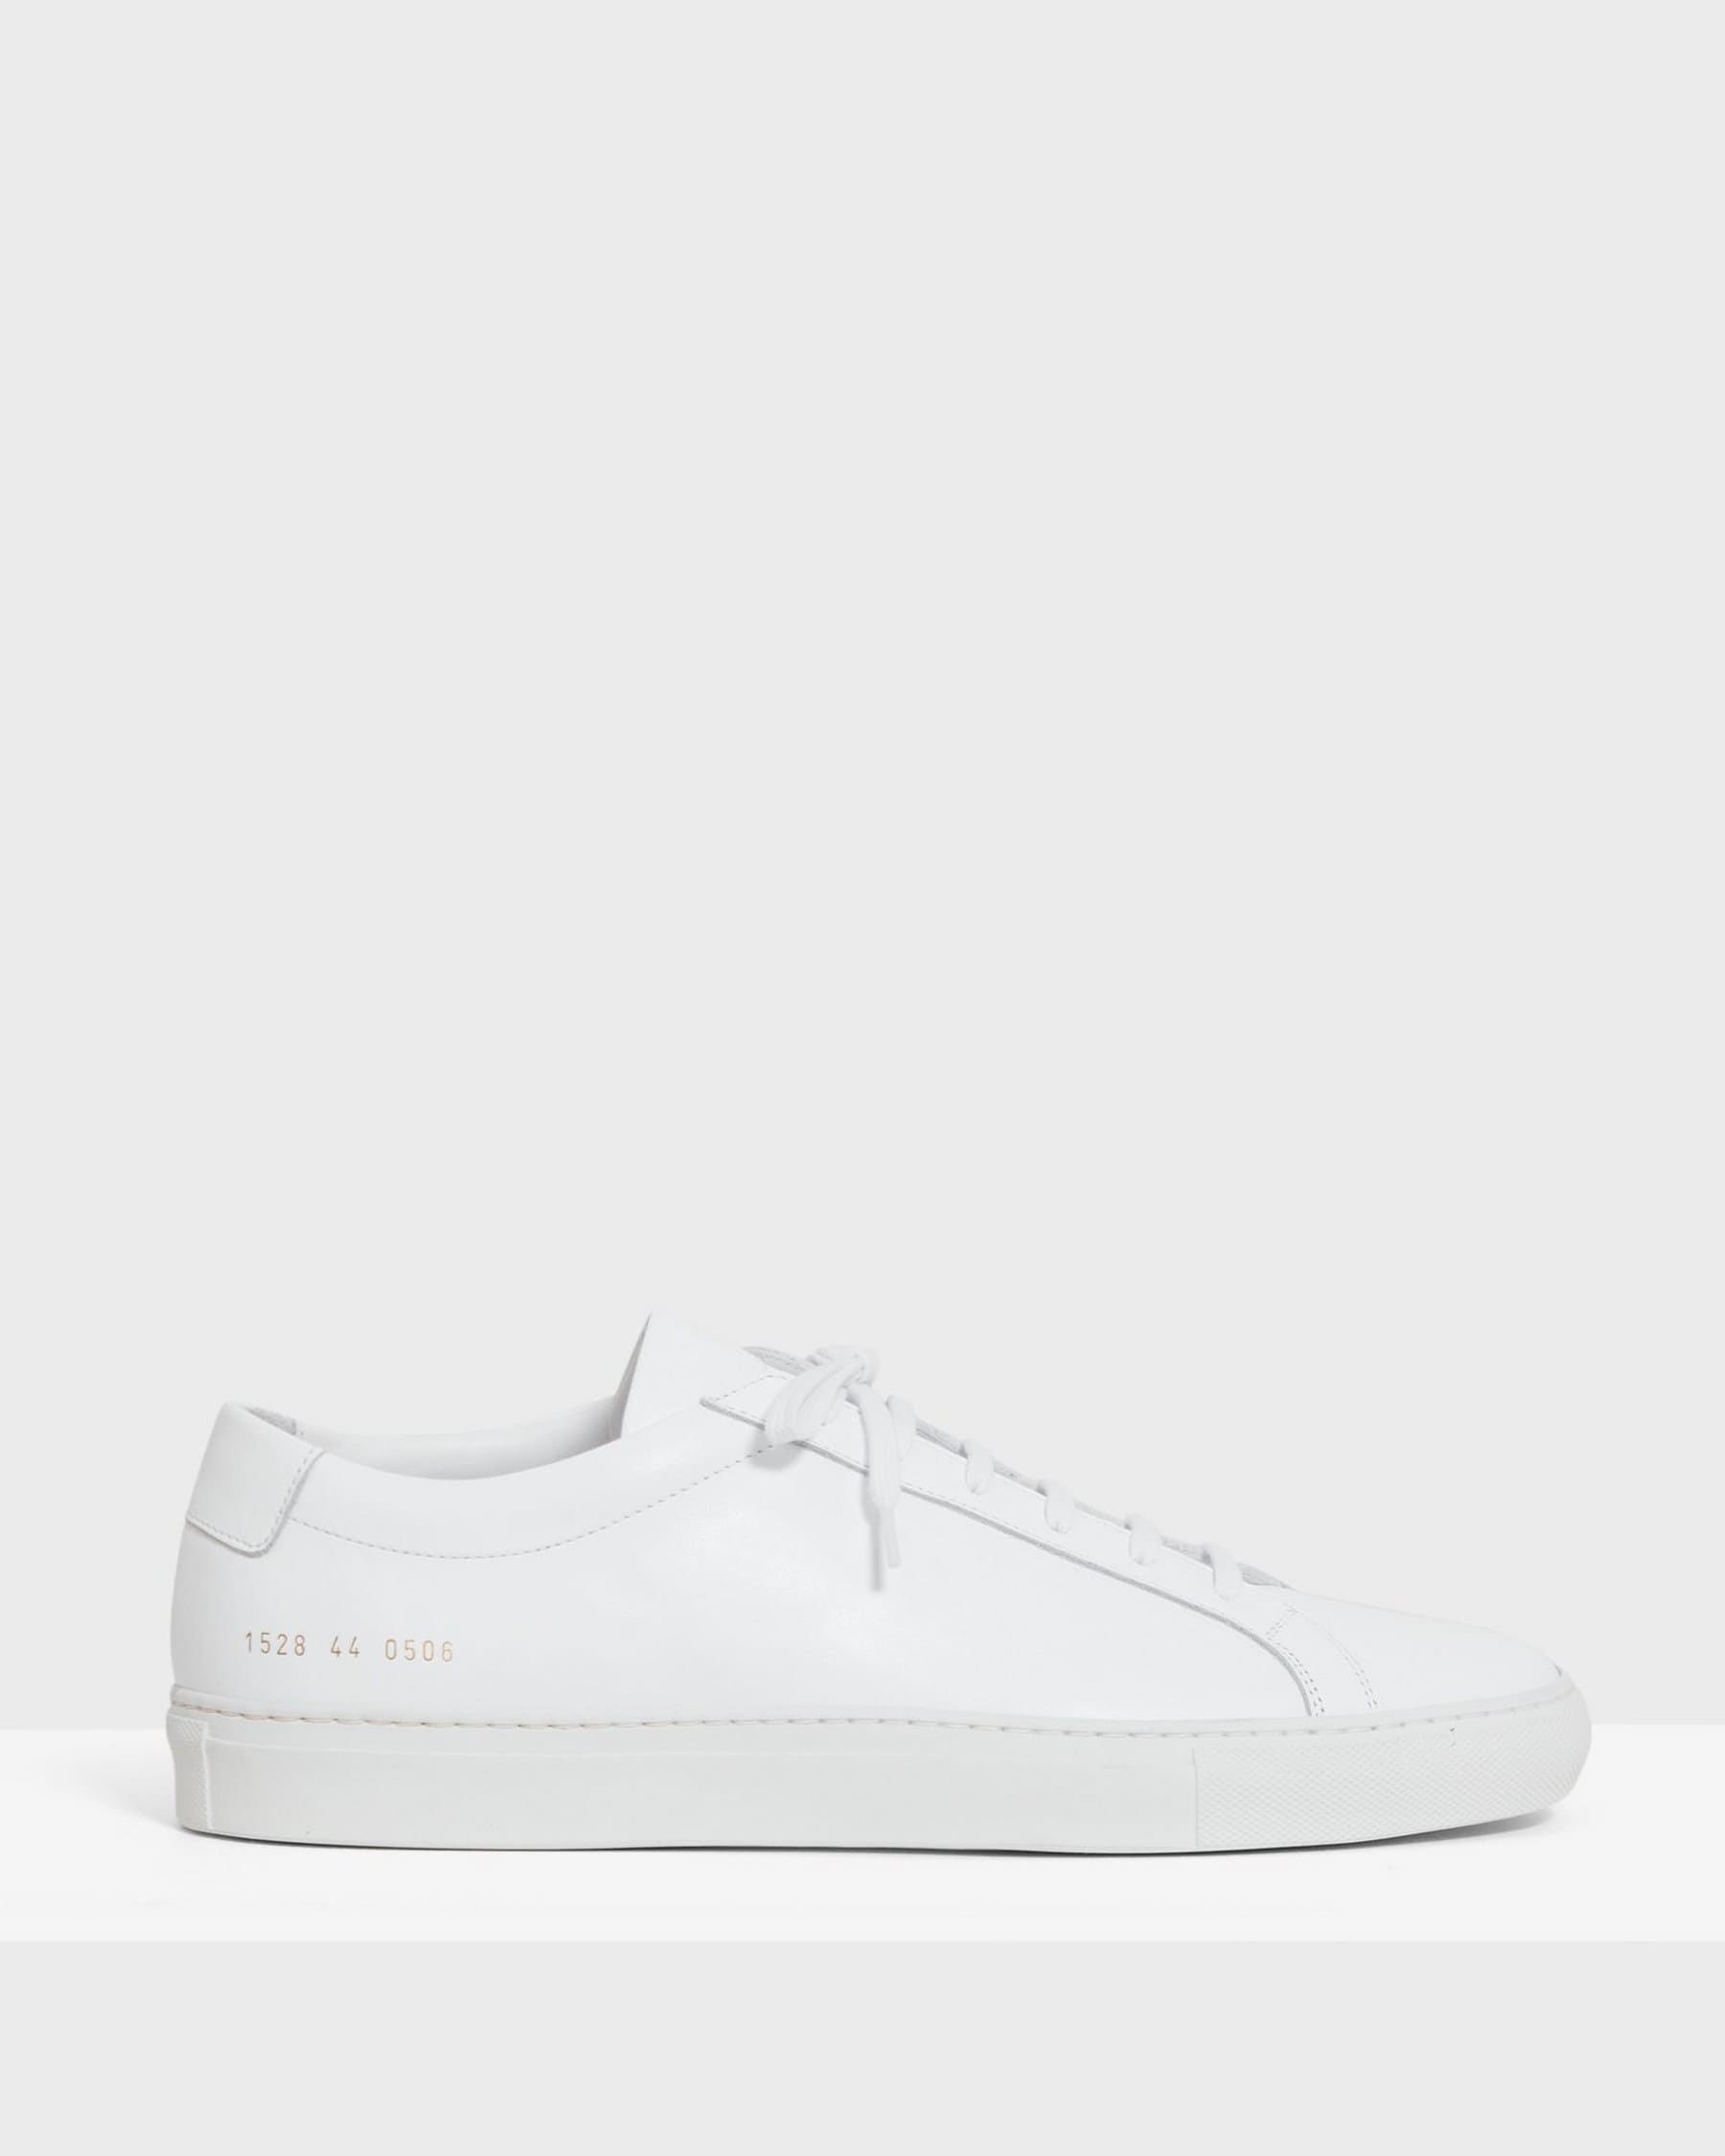 hundred Shrine breast Common Projects Men's Original Achilles Sneakers | Theory